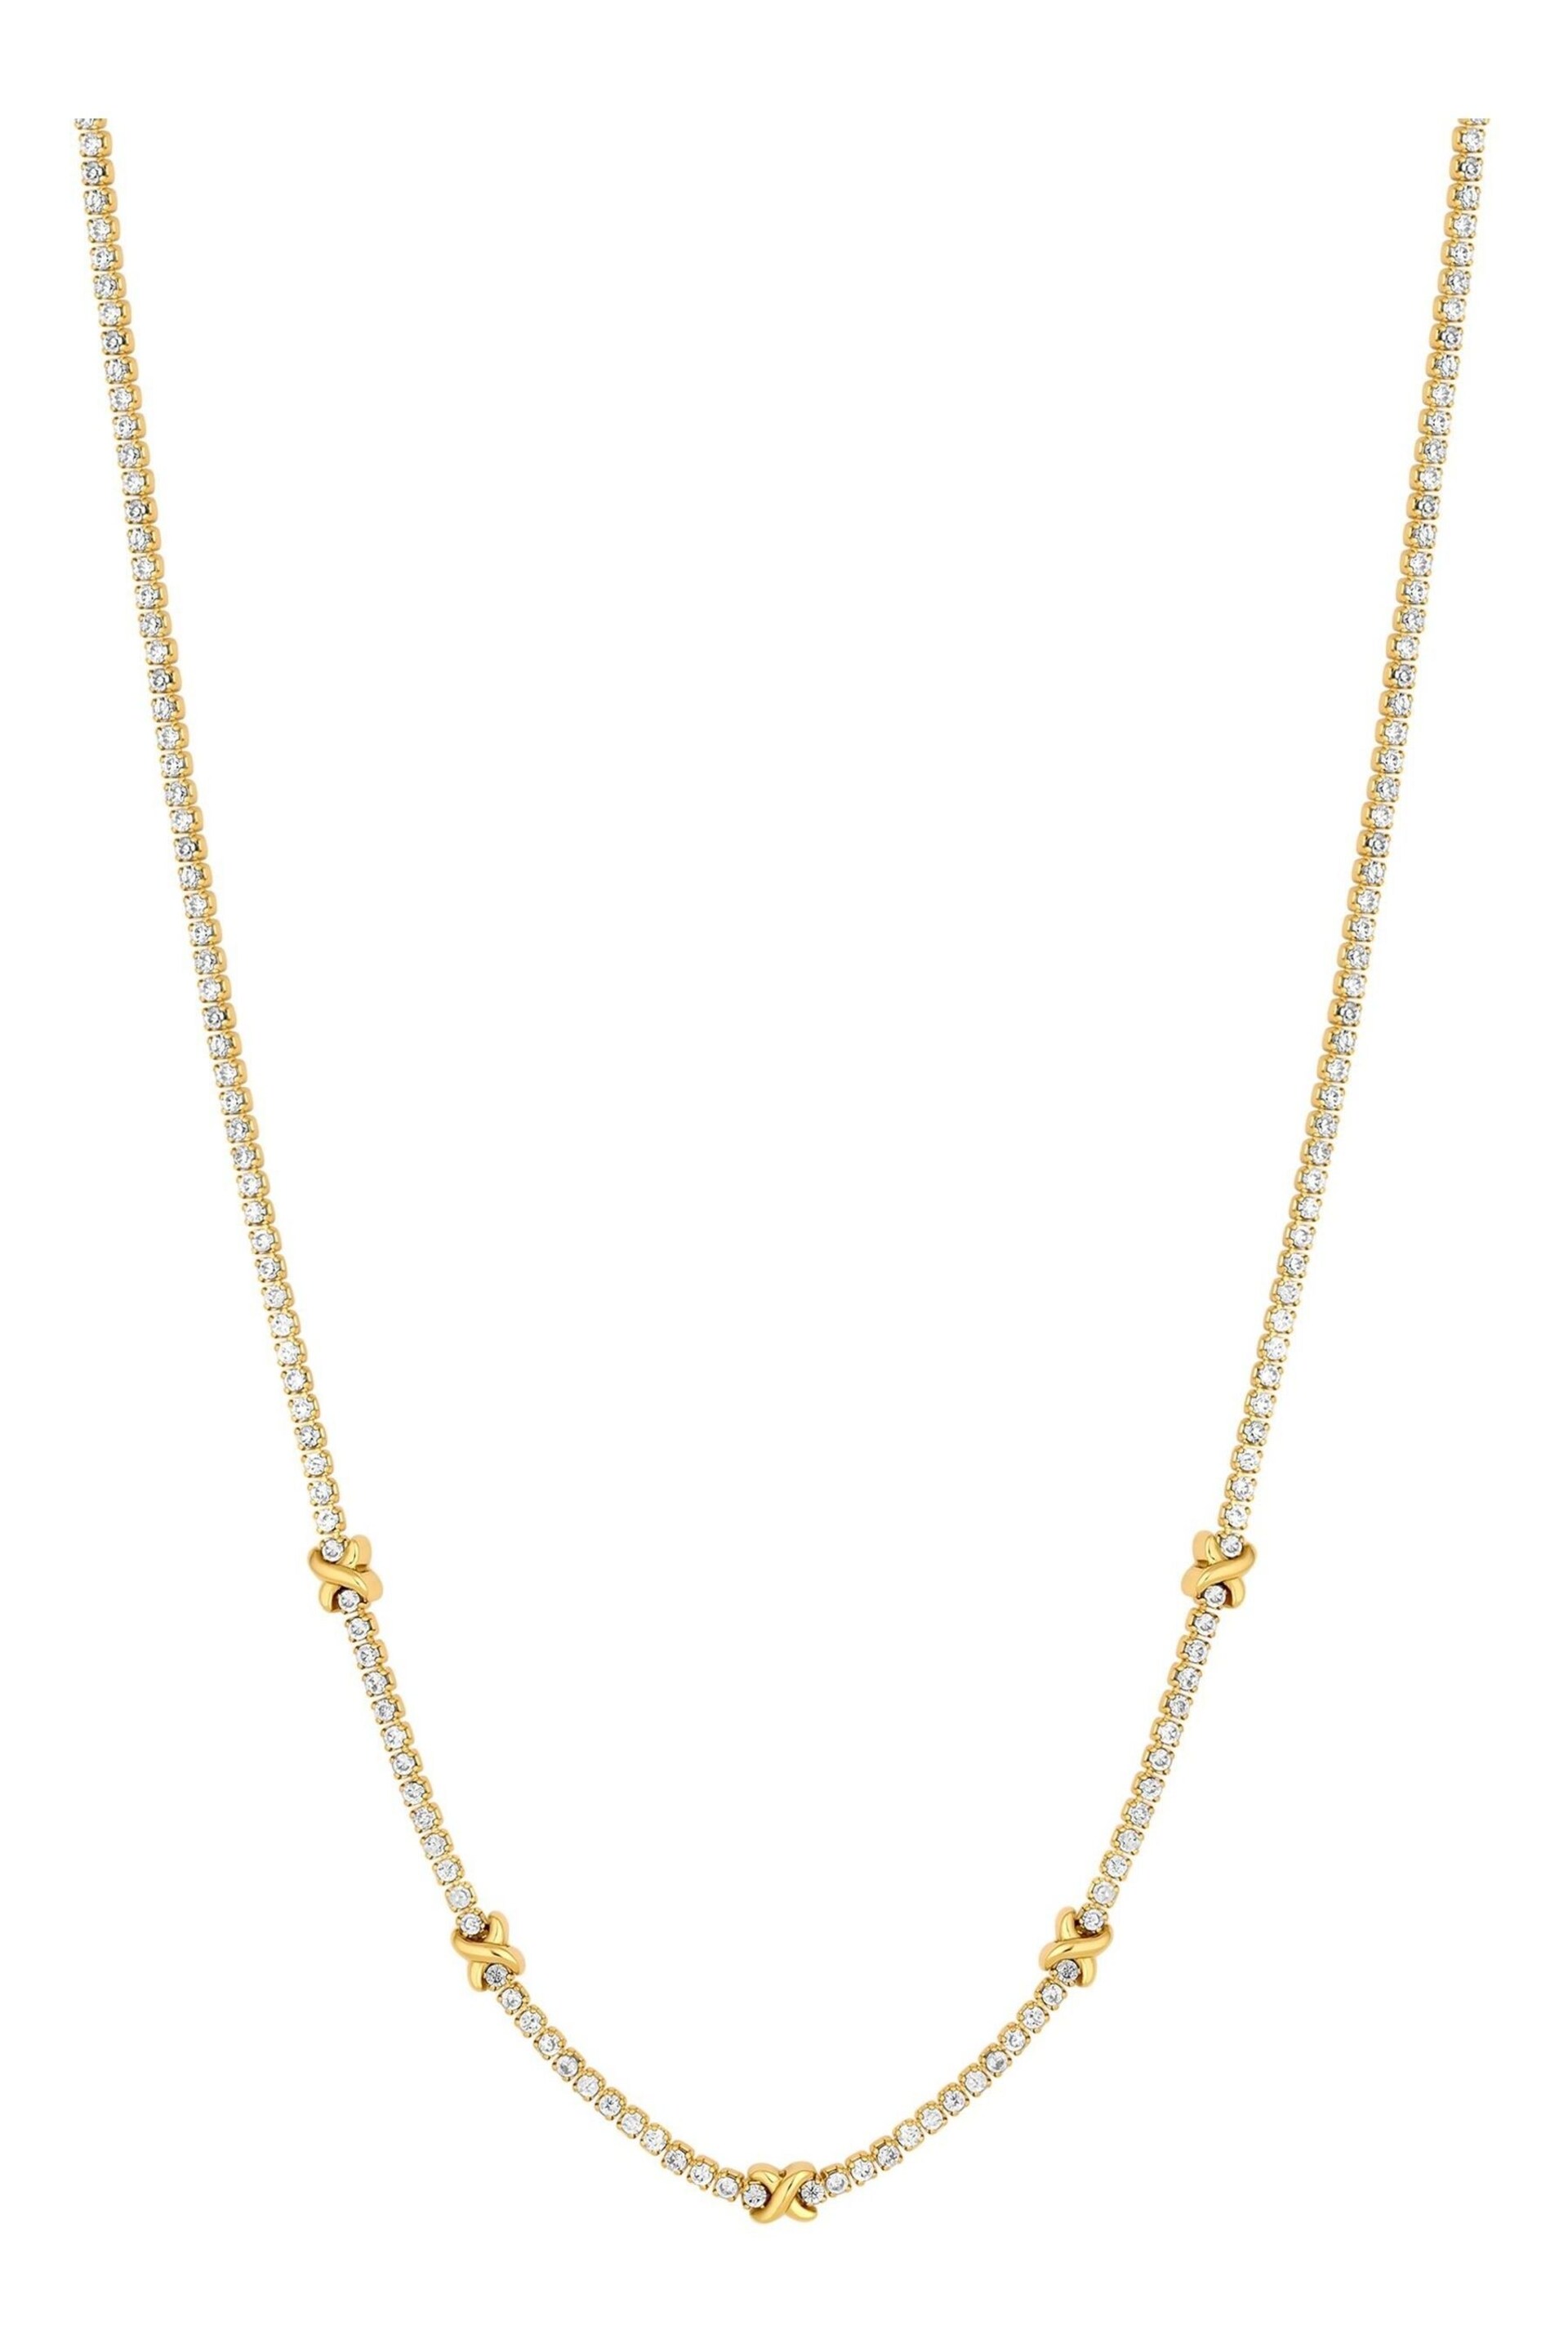 Inicio Gold Plated Cubic Zirconia Kiss Necklace - Image 1 of 2